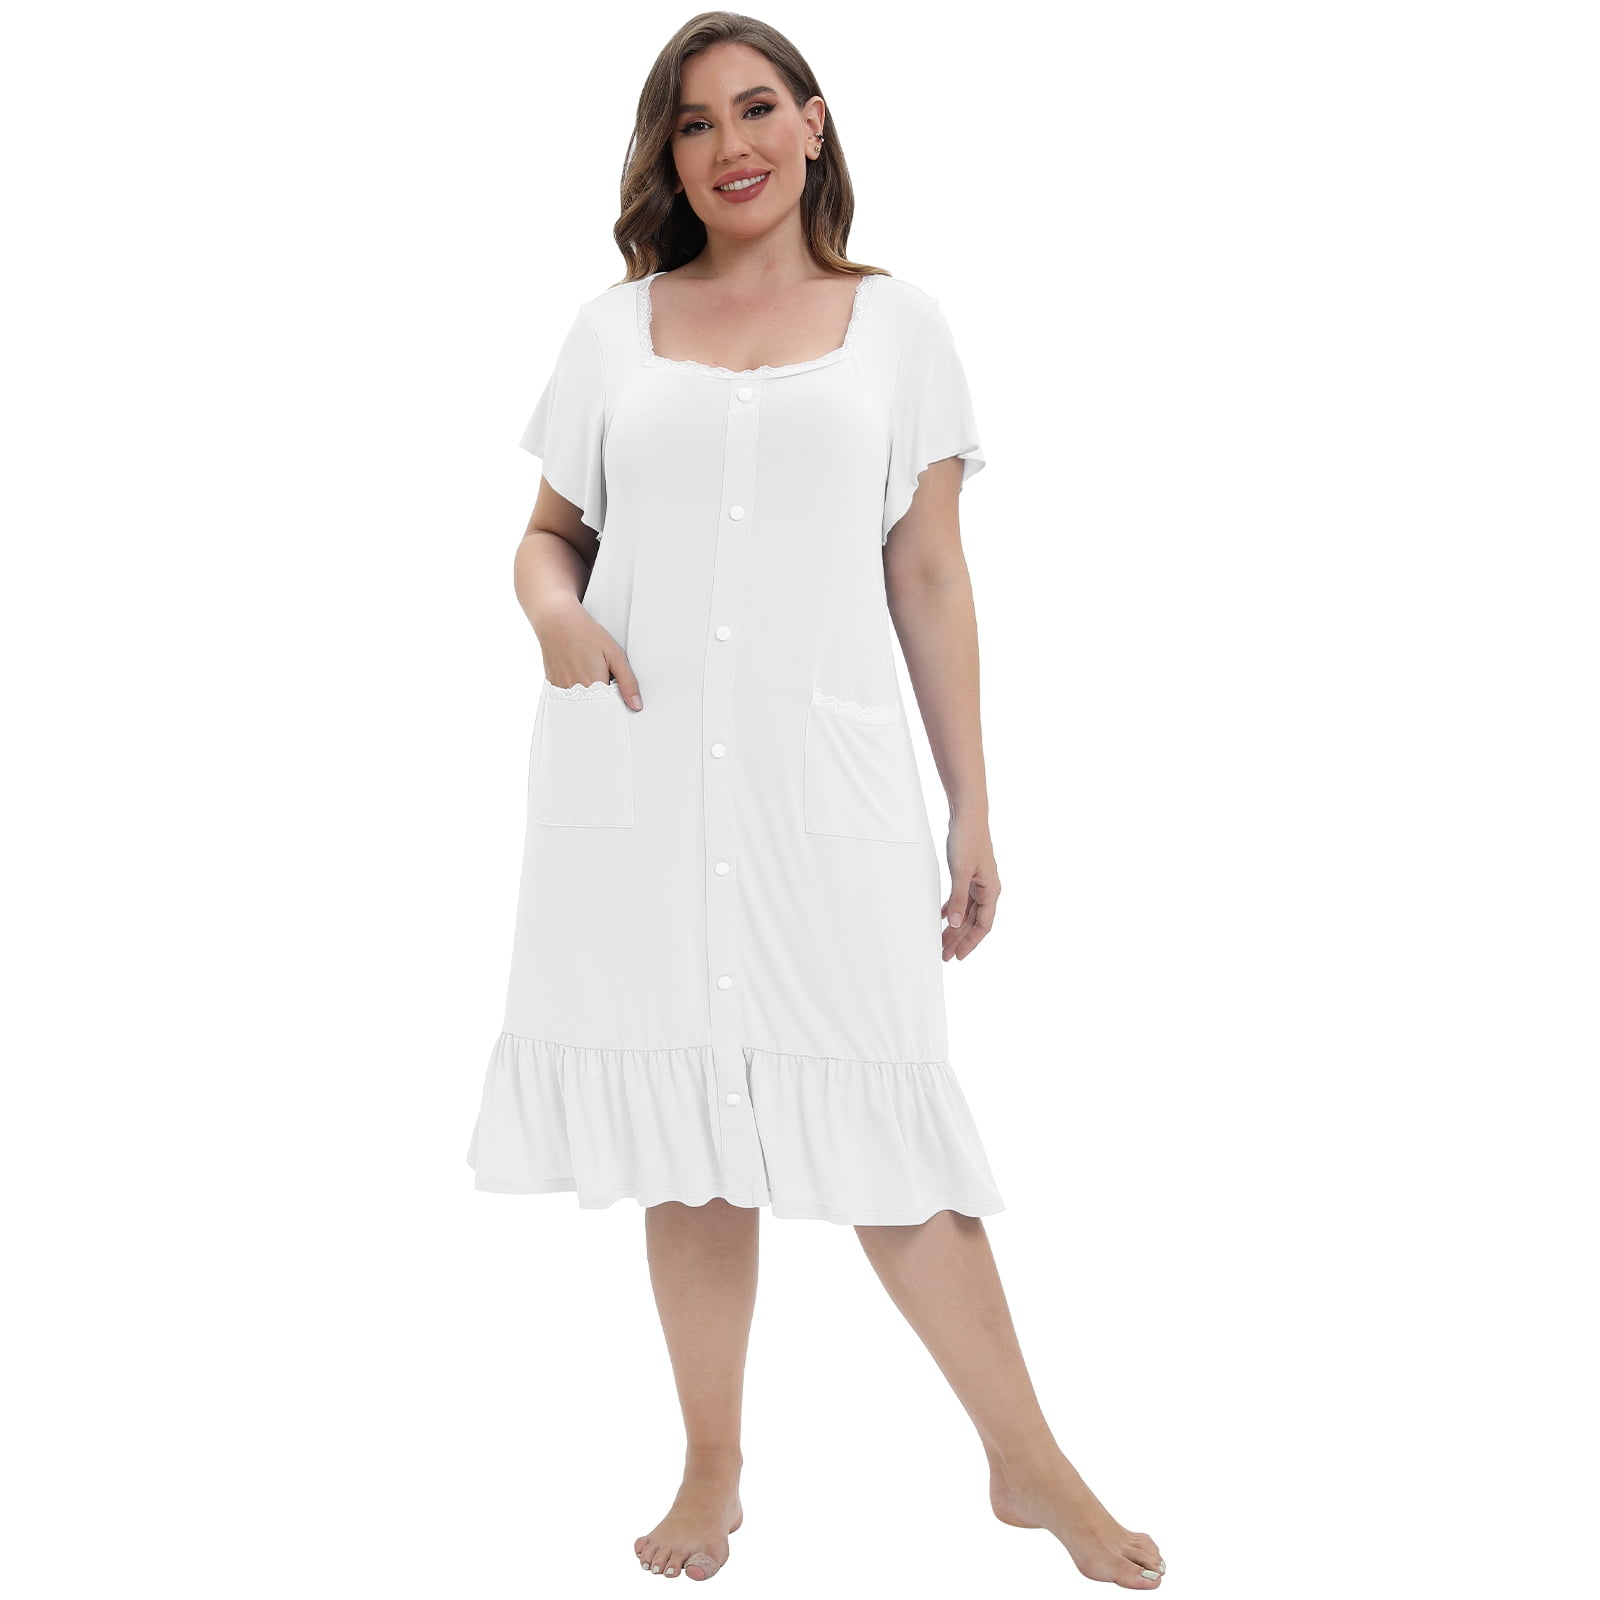 Women's Plus Size Nightgown with Pockets Short Sleeve Square Neck ...